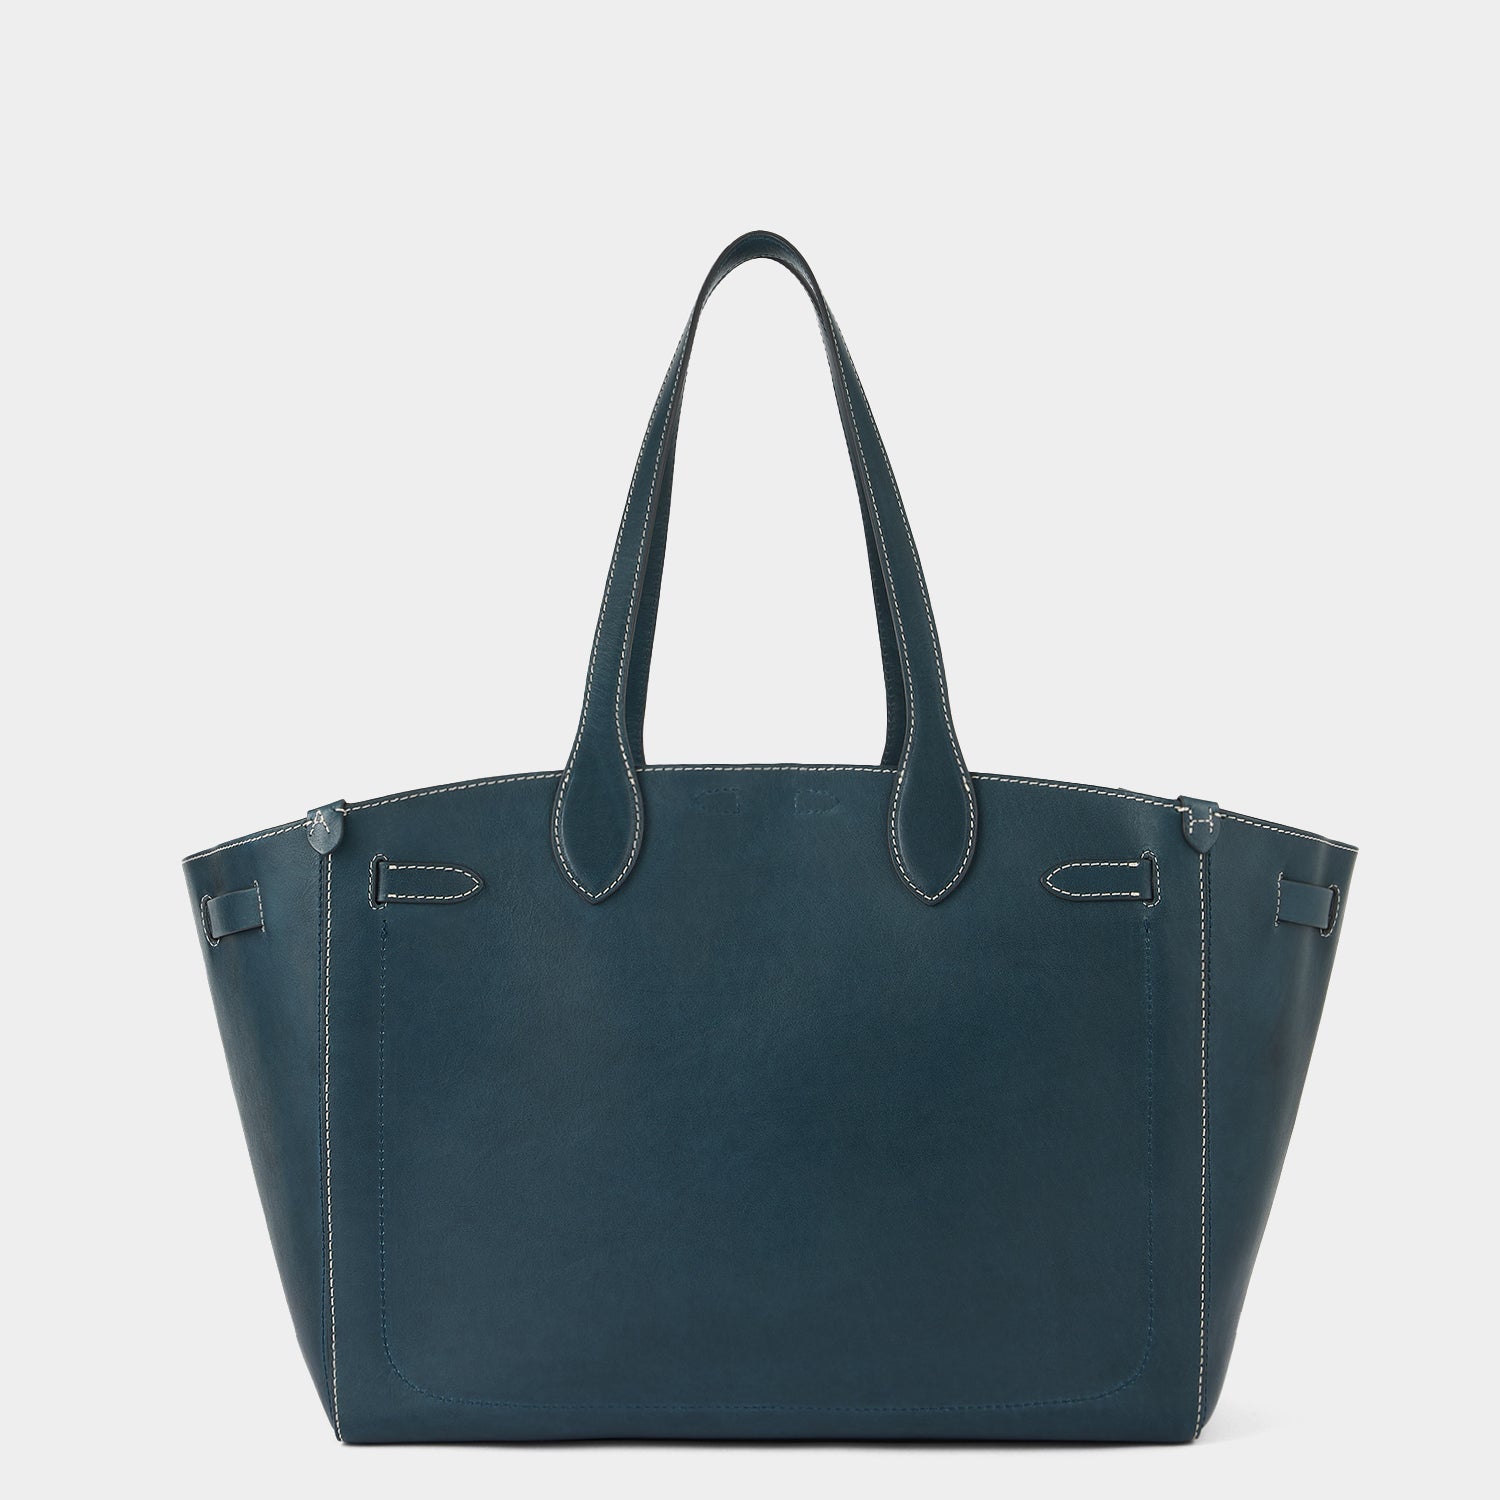 Return to Nature Tote -

                  
                    Compostable Leather in Dark Holly -
                  

                  Anya Hindmarch EU
